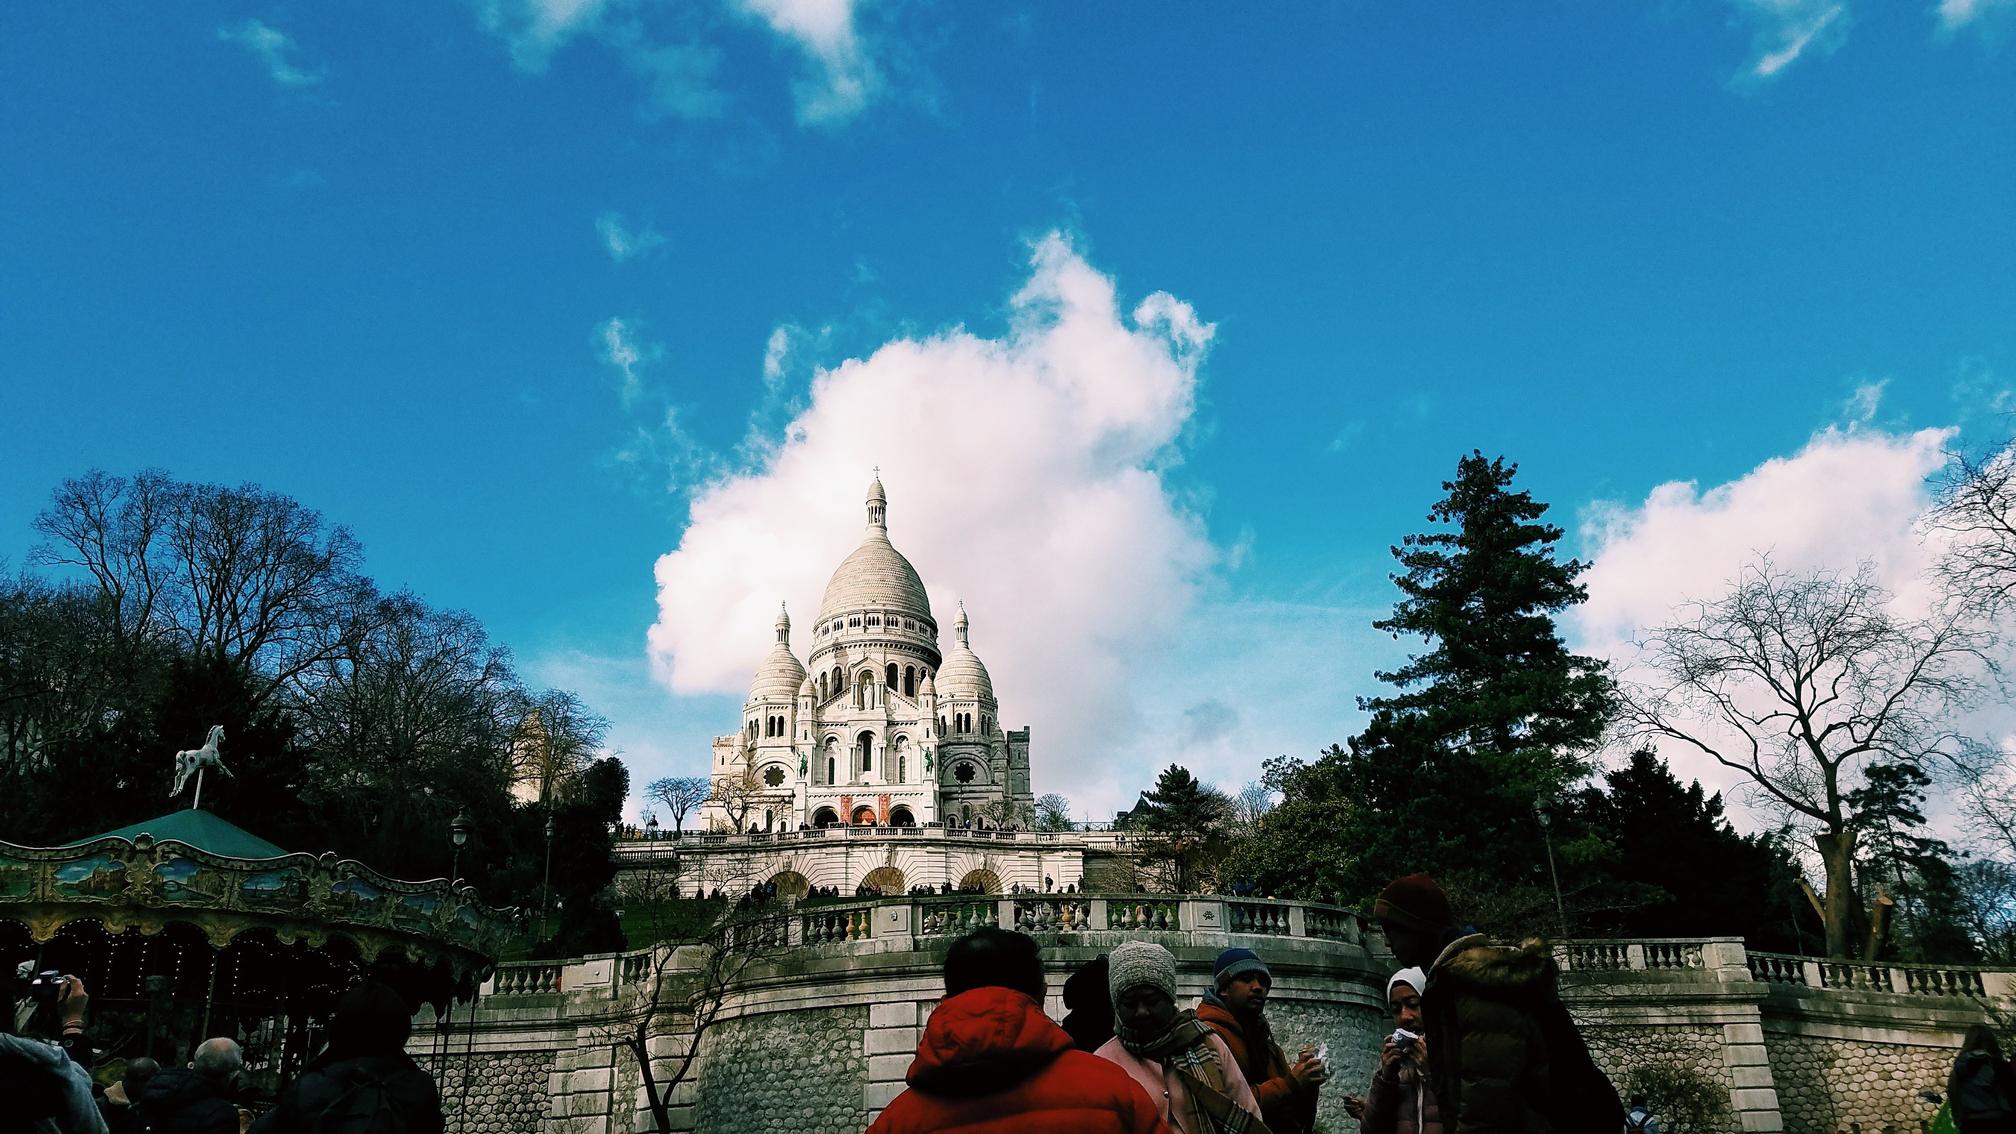 Sacre Coeur on a bright sunny day, sitting on the hill above some admiring tourists and the carousel to their left.